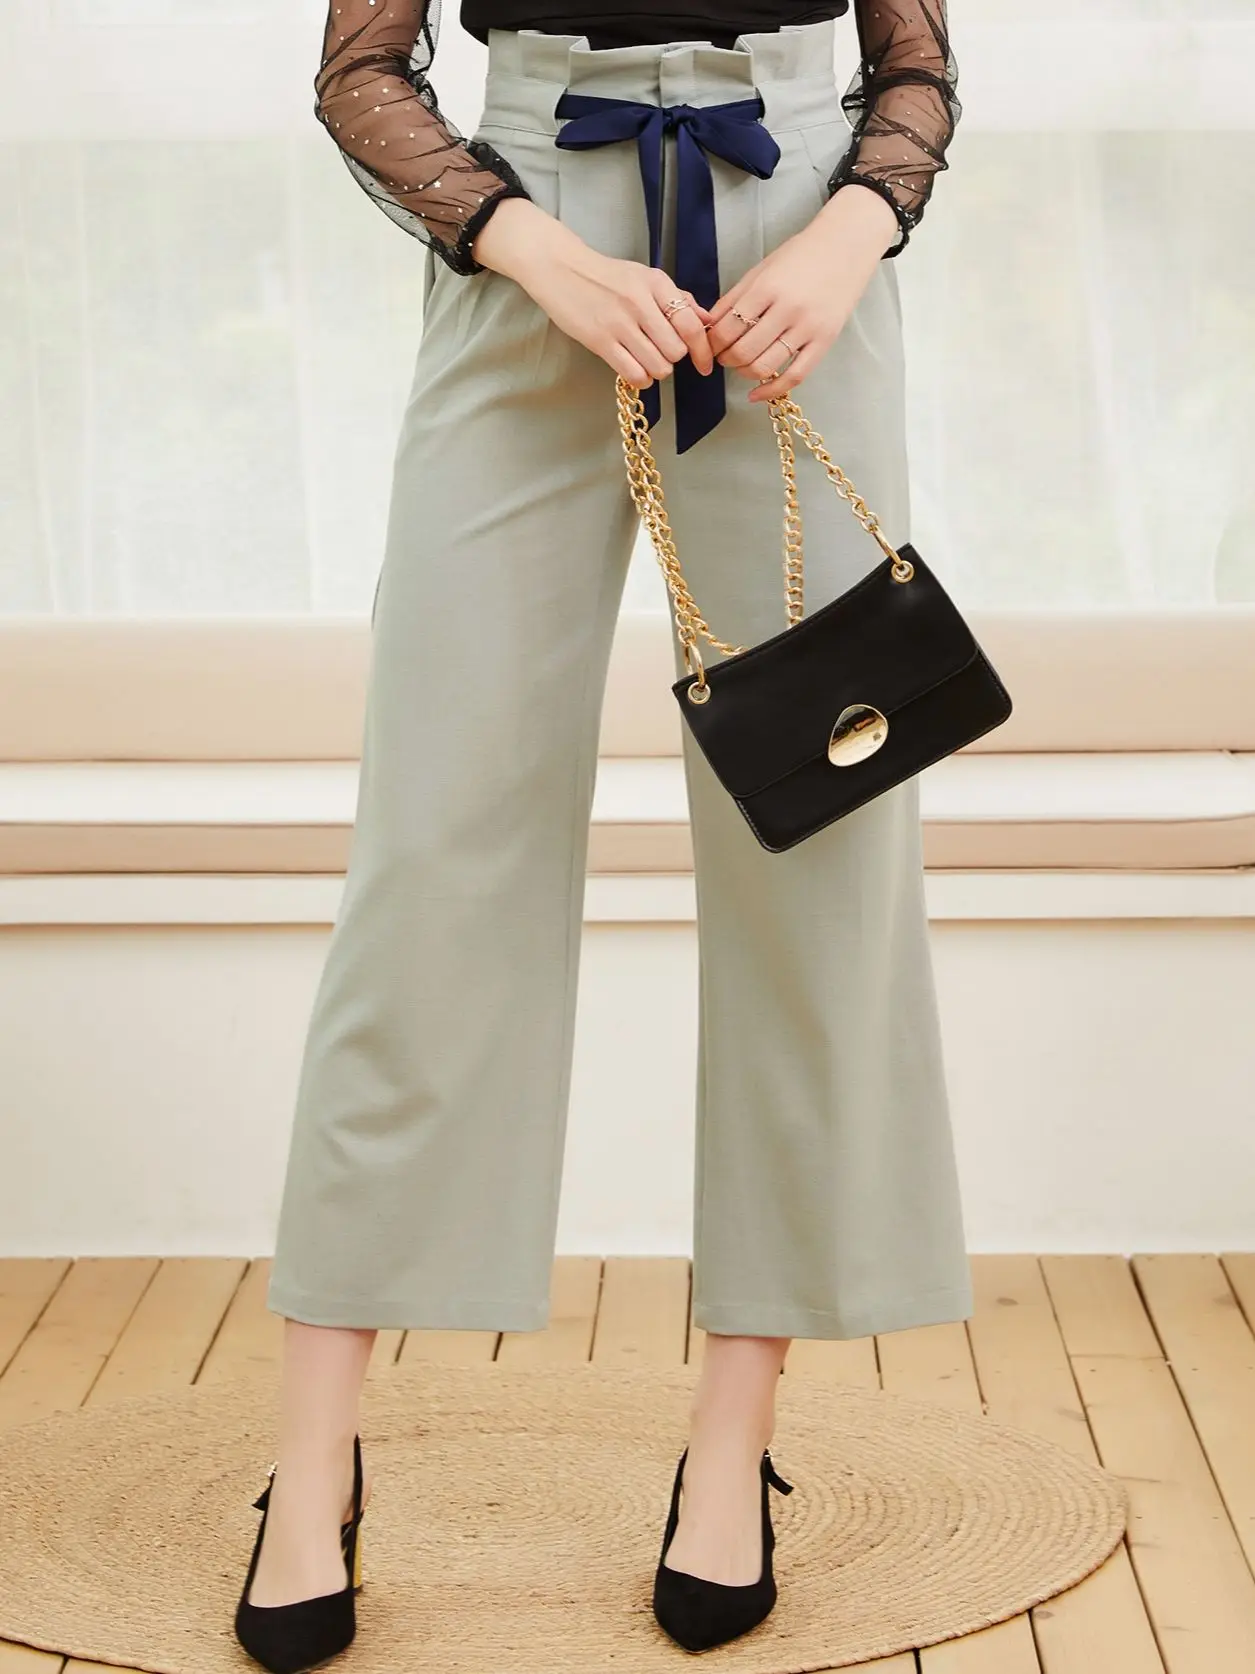 Strict brand women's clothing spring and summer new women's Capris straight  pants high waist comfortable casual pants|Pants & Capris| - AliExpress